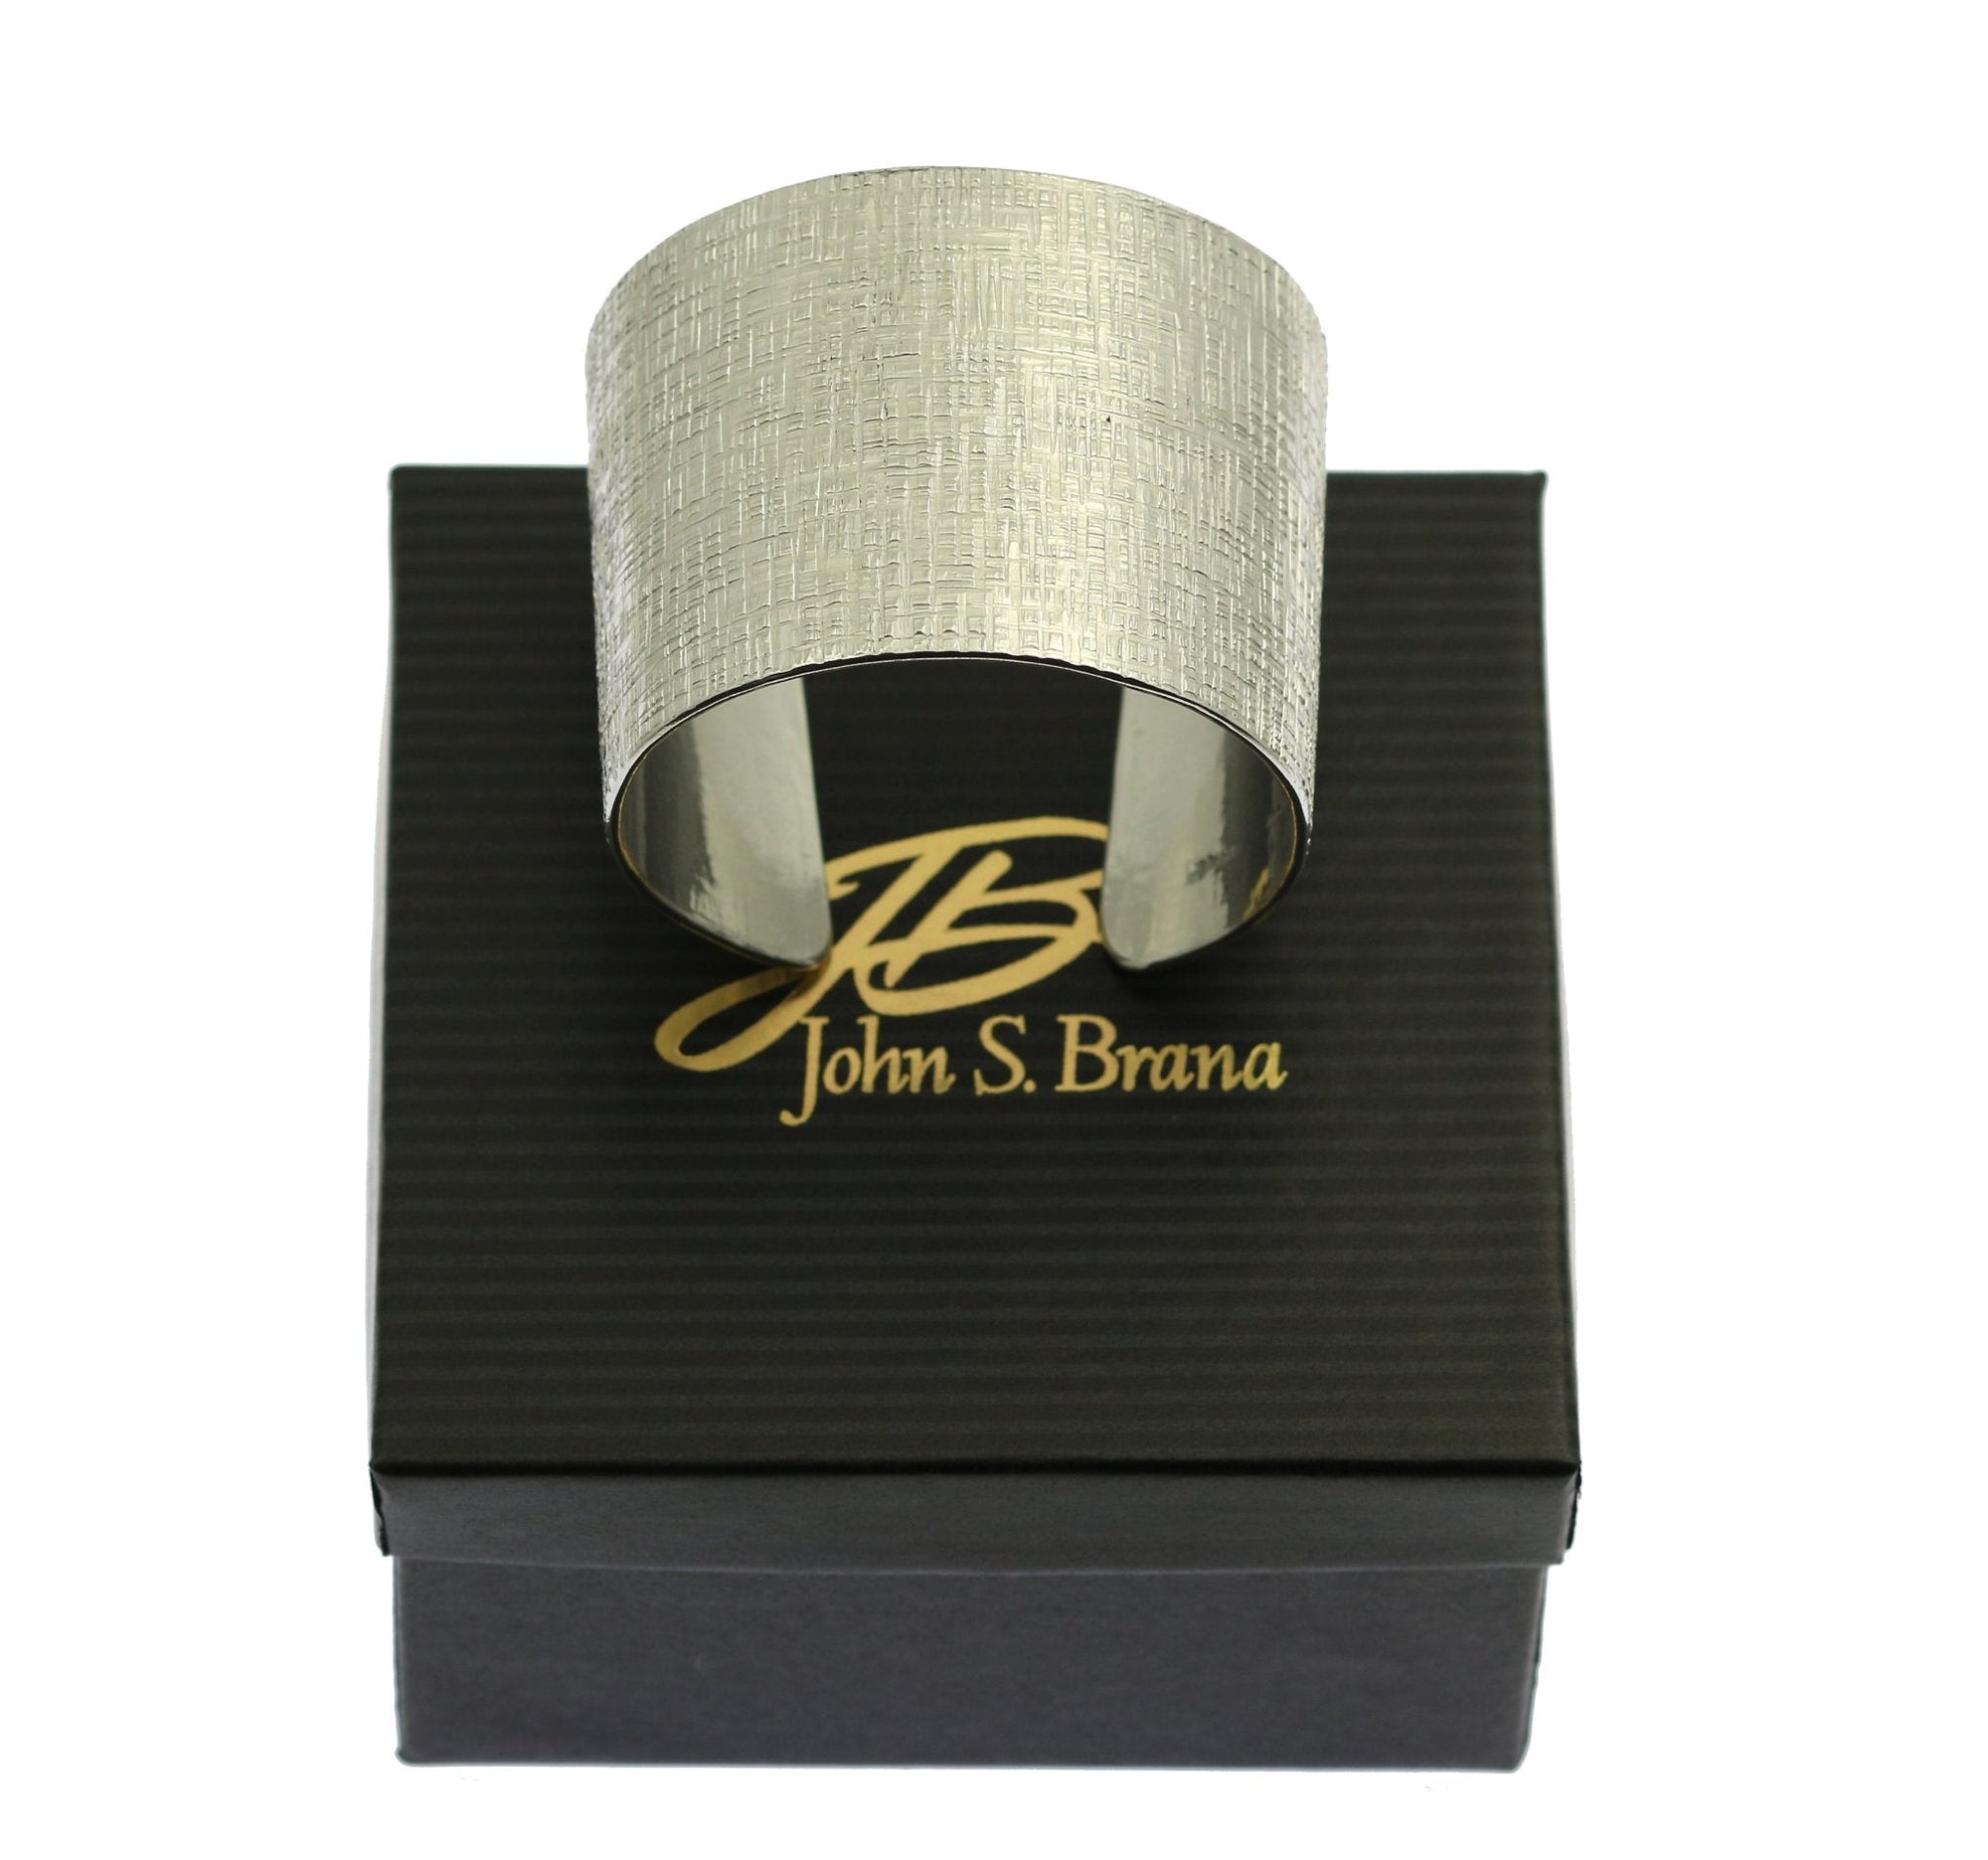 Linen Texturized Aluminum Cuff in Black Branded Gift Box